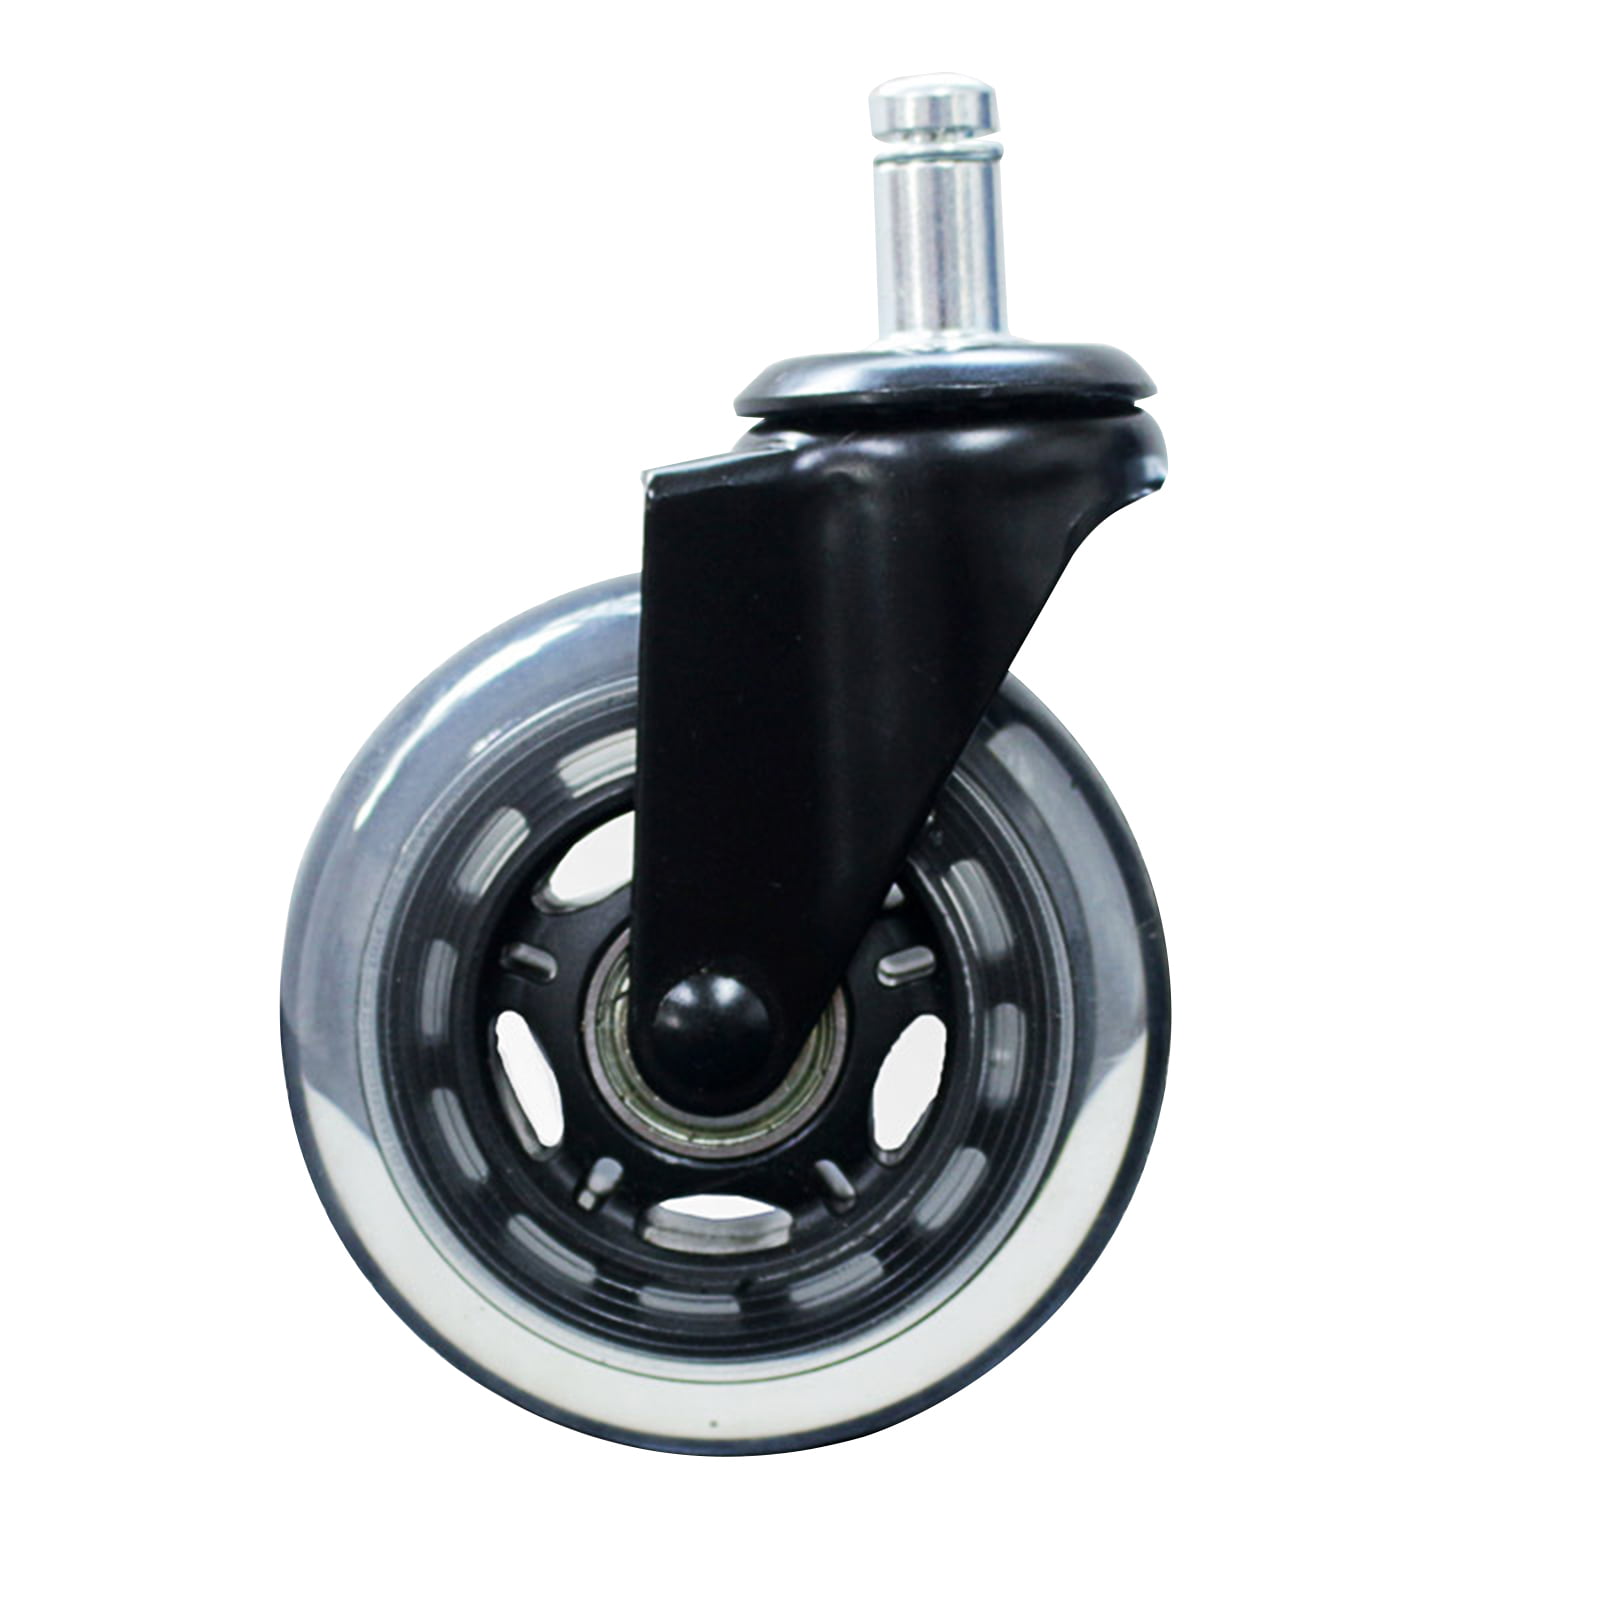 LPHY Office Chair Caster Wheels 2.5inch Perfect for Hardwood and Carpet 